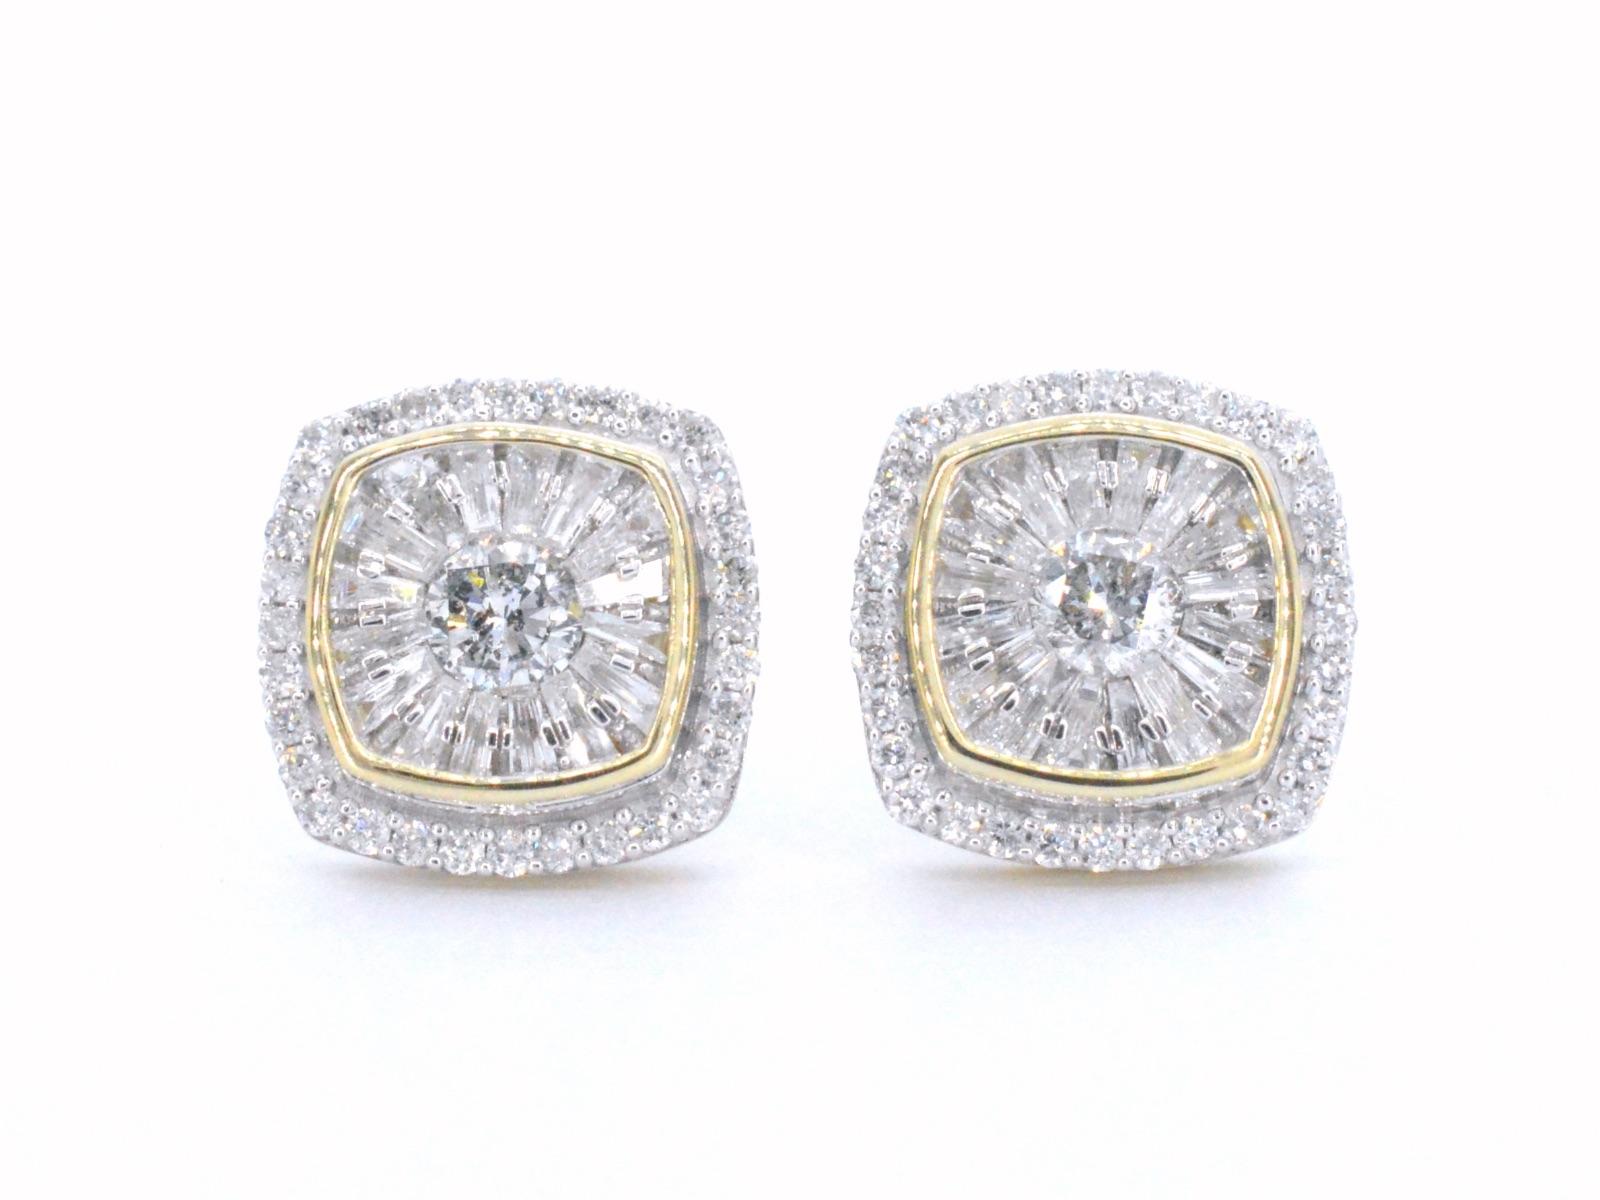 Brilliant Cut Gold Entourage Earrings Set with 1.20 Carat For Sale